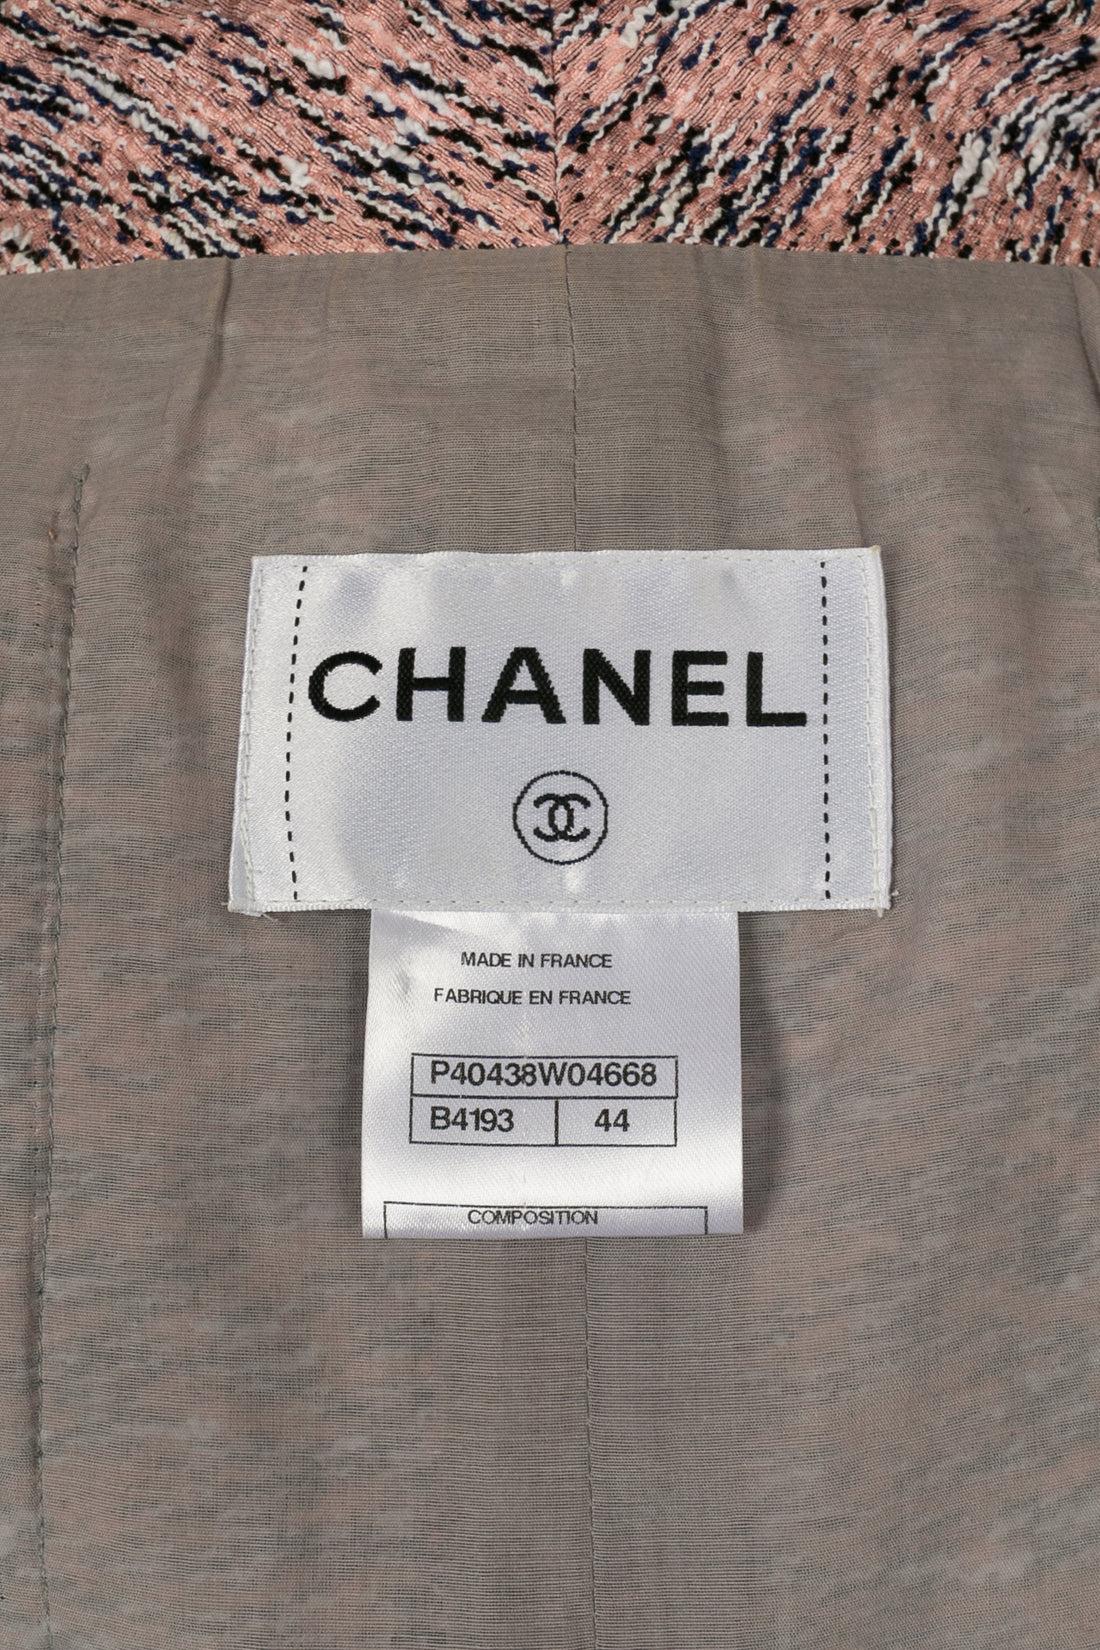 Chanel Tweed Jacket and Skirt Suit Set For Sale 10